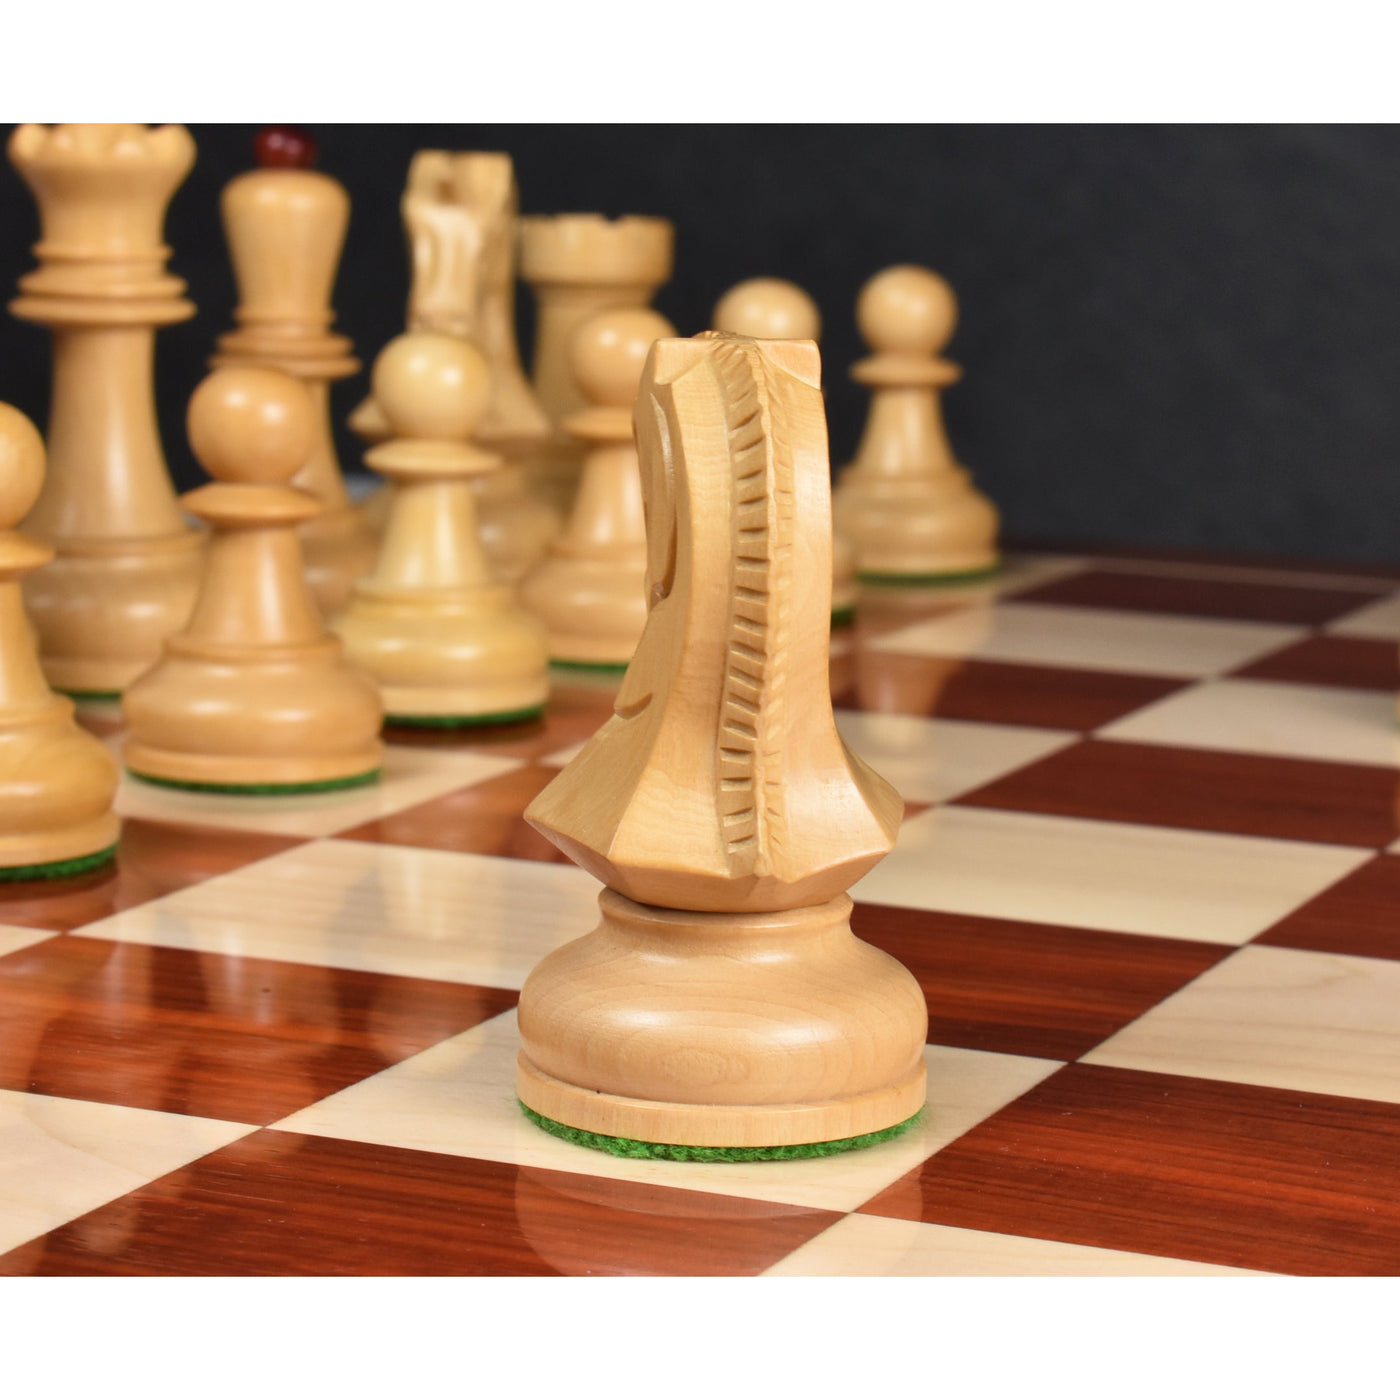 1970s' Dubrovnik Chess Pieces | Chess Pieces Only | Wood Chess Sets